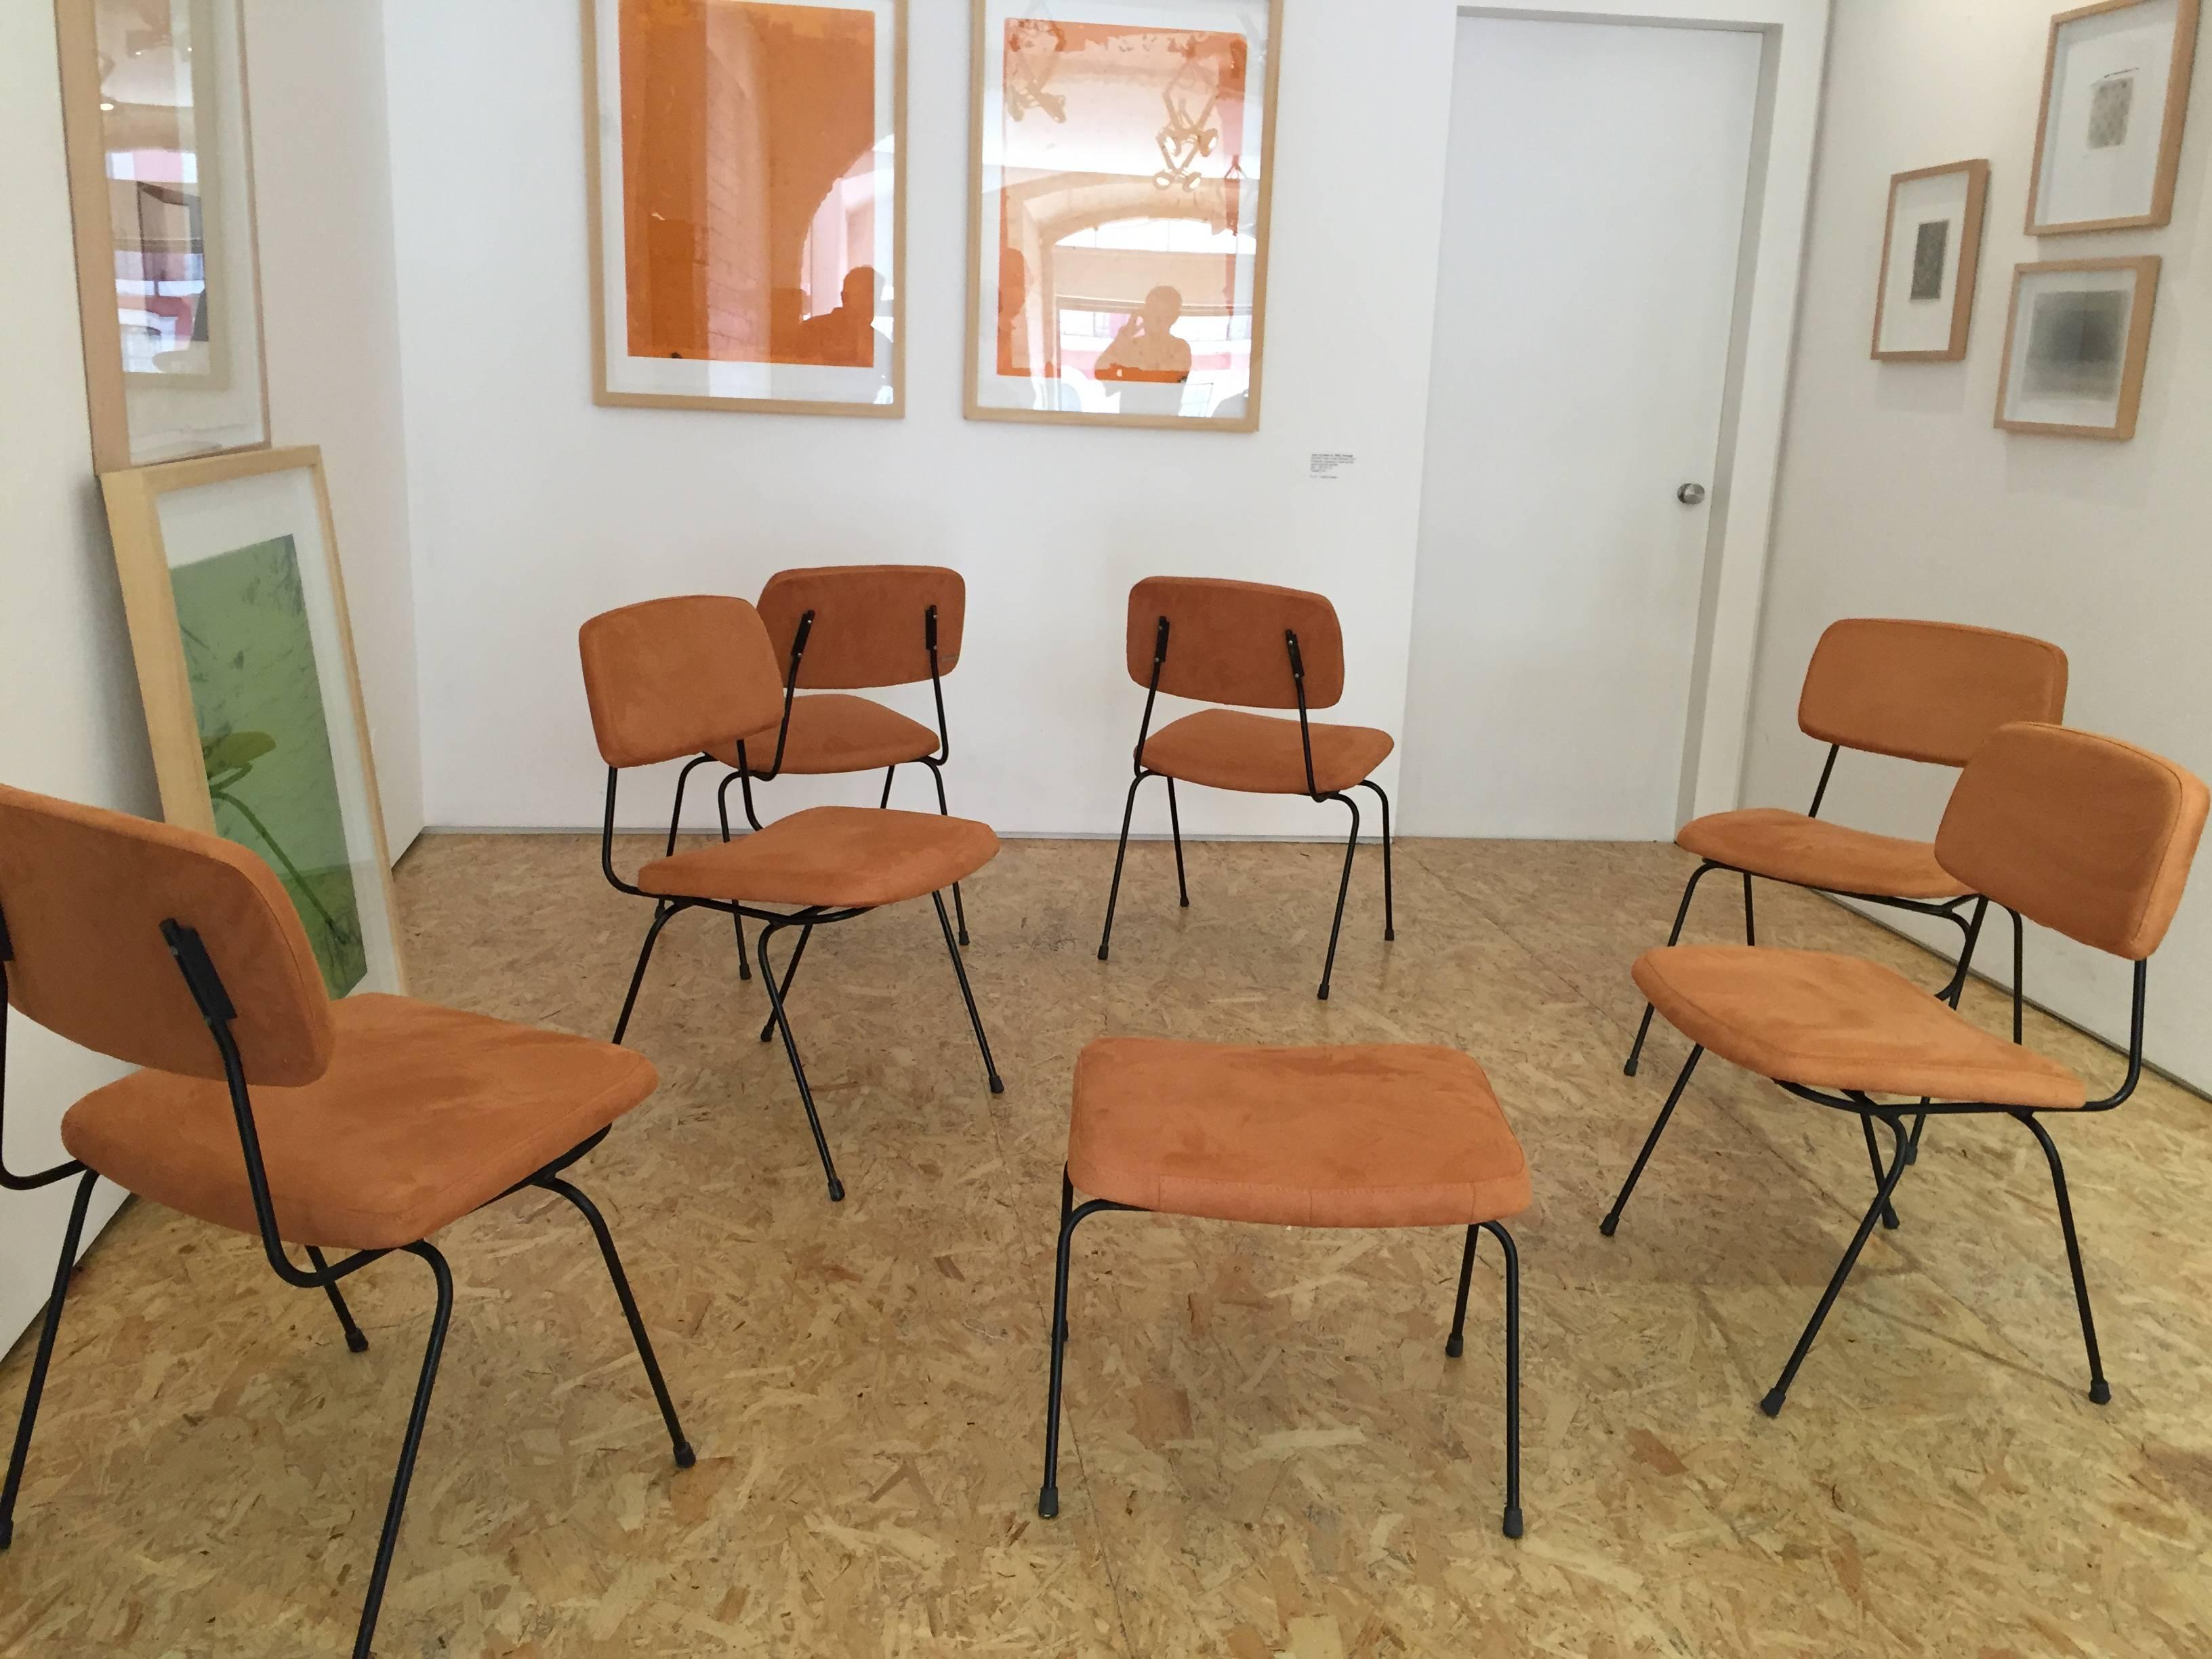 Set by Daciano da Costa with six chairs and one stool made in 1962.
Very close design of Paulin 770 chairs because Daciano da Costa started a commercial collaboration with Airborne Editions in order to make furniture in Portugal. 
All the set is